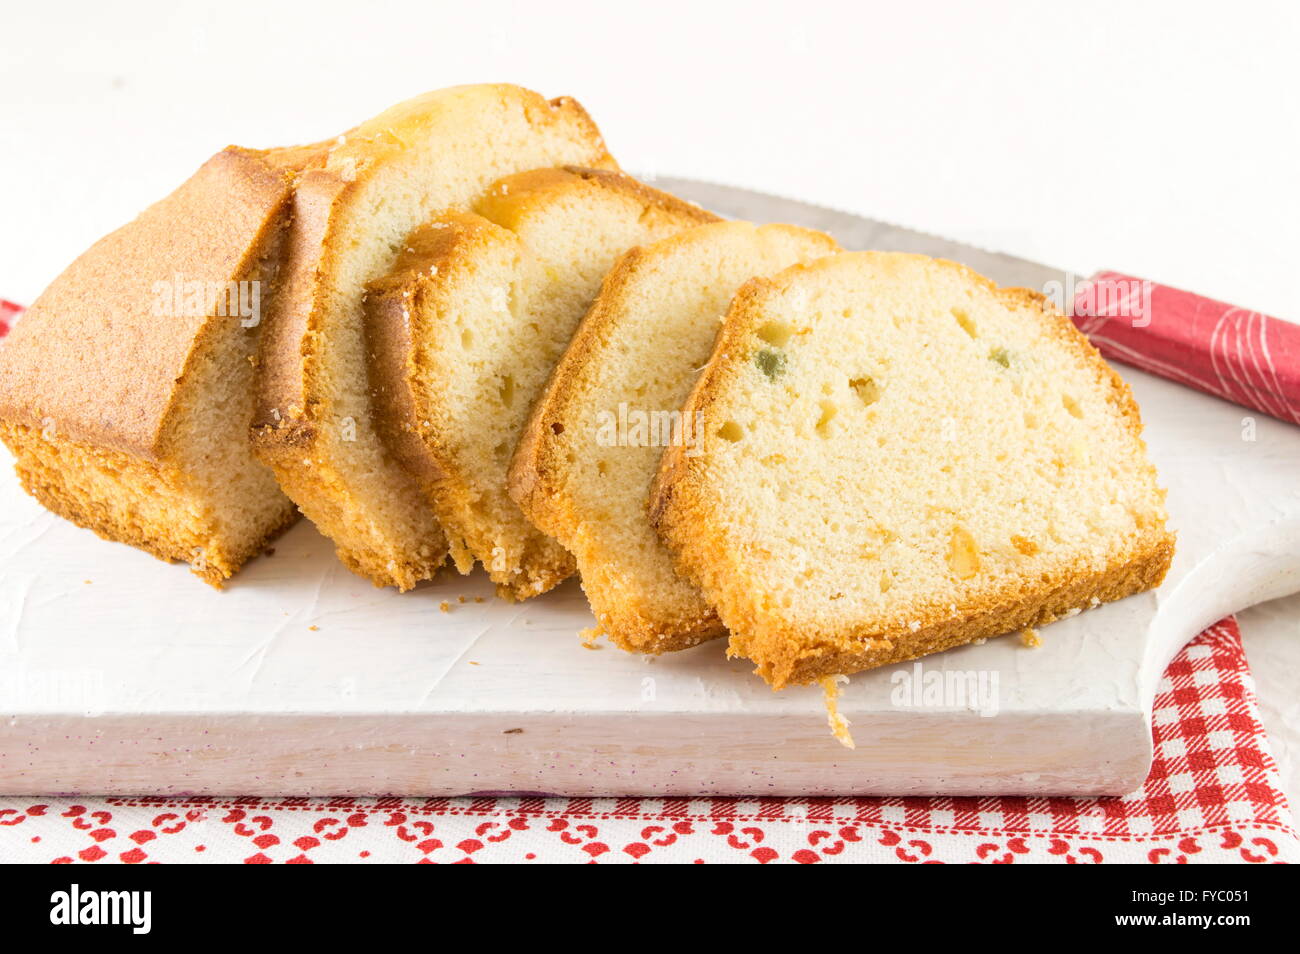 Homemade fruit bread slices on a board Stock Photo